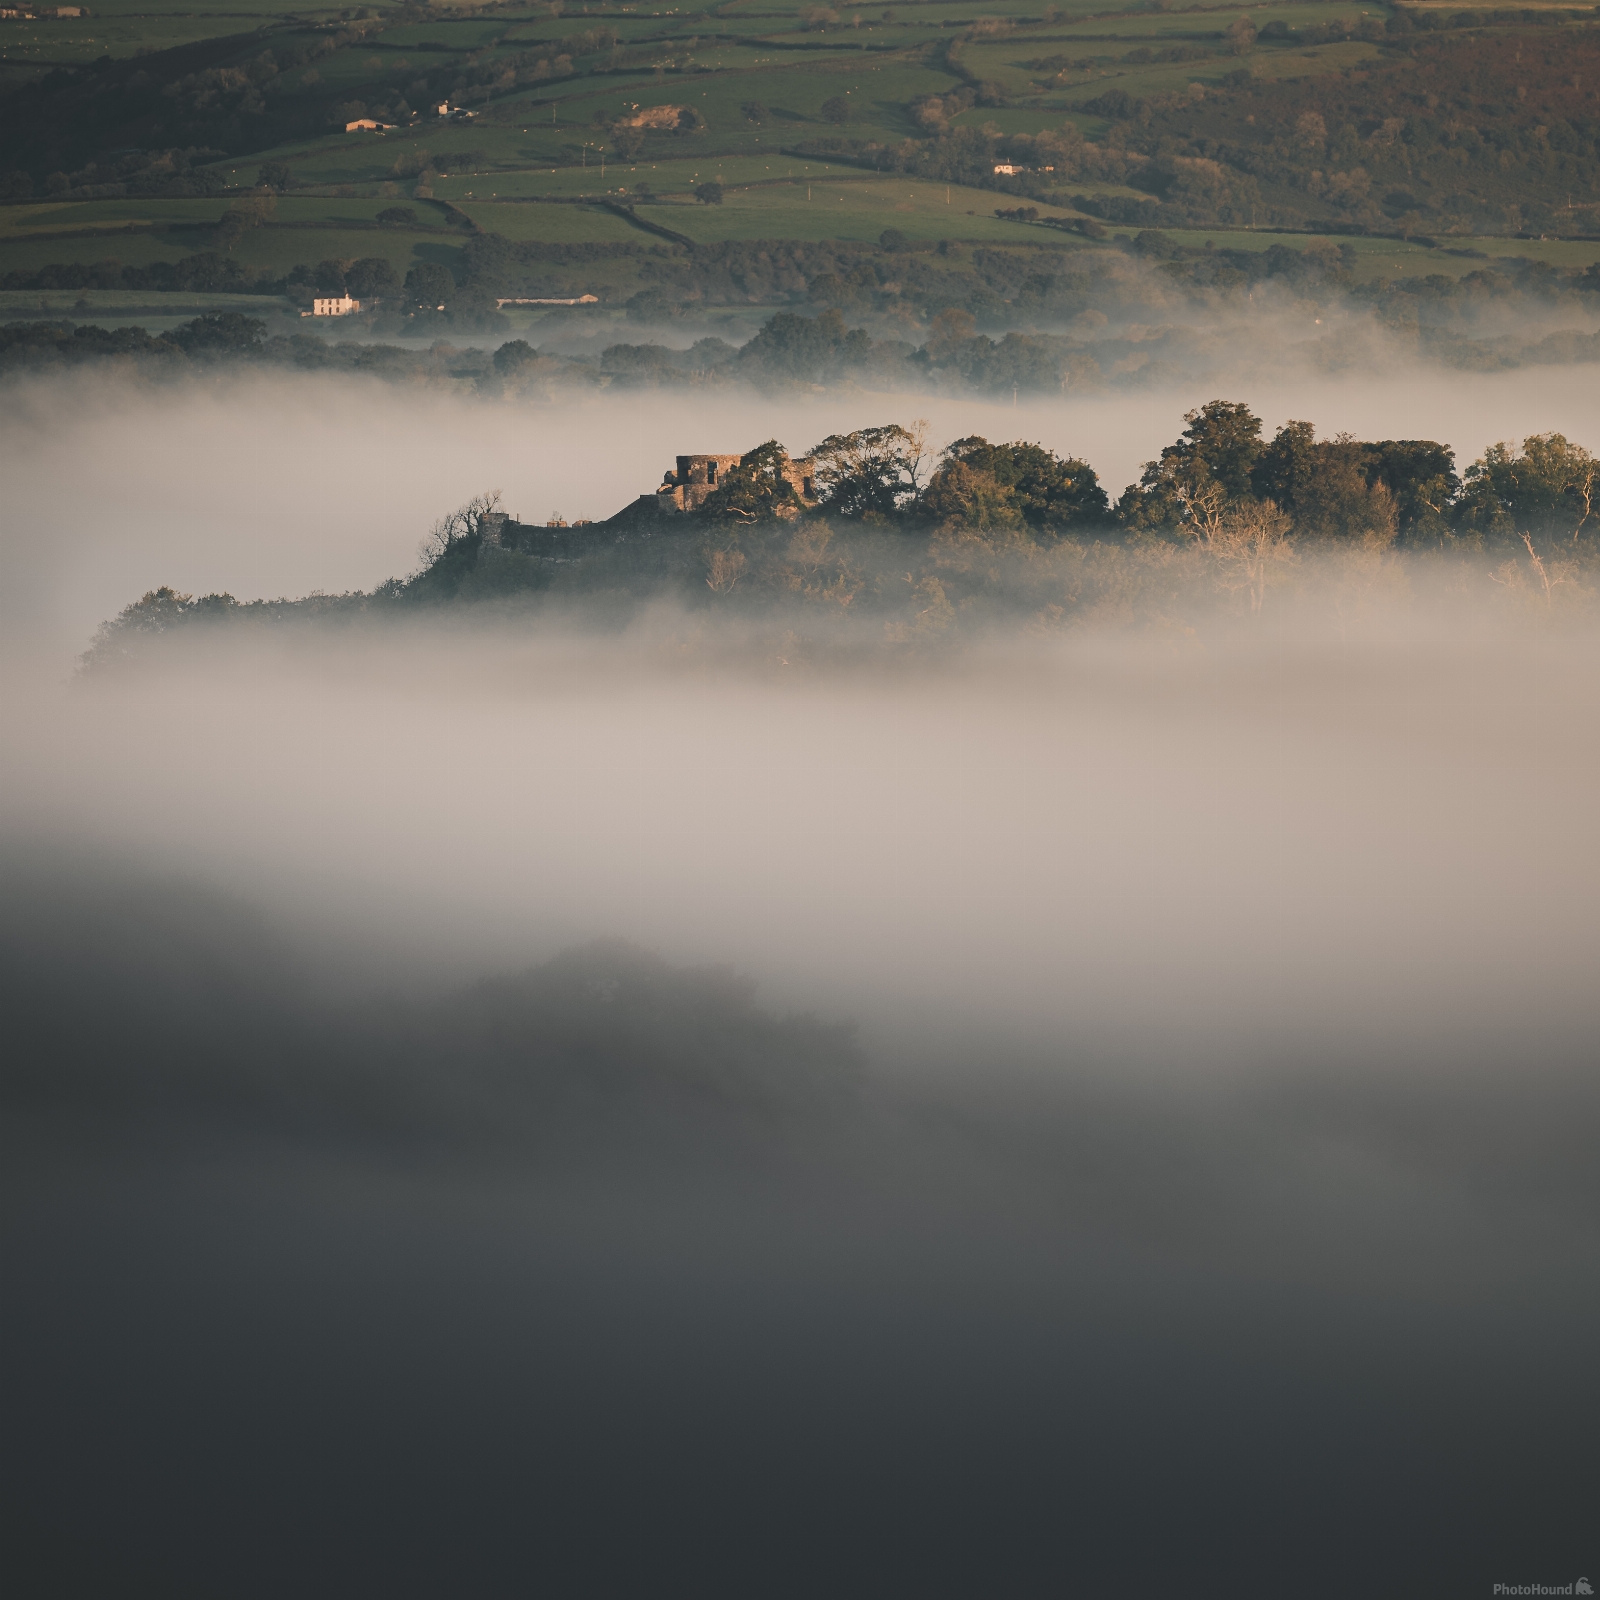 Image of South Viewpoint Dinefwr Castle by Daniel Phillips